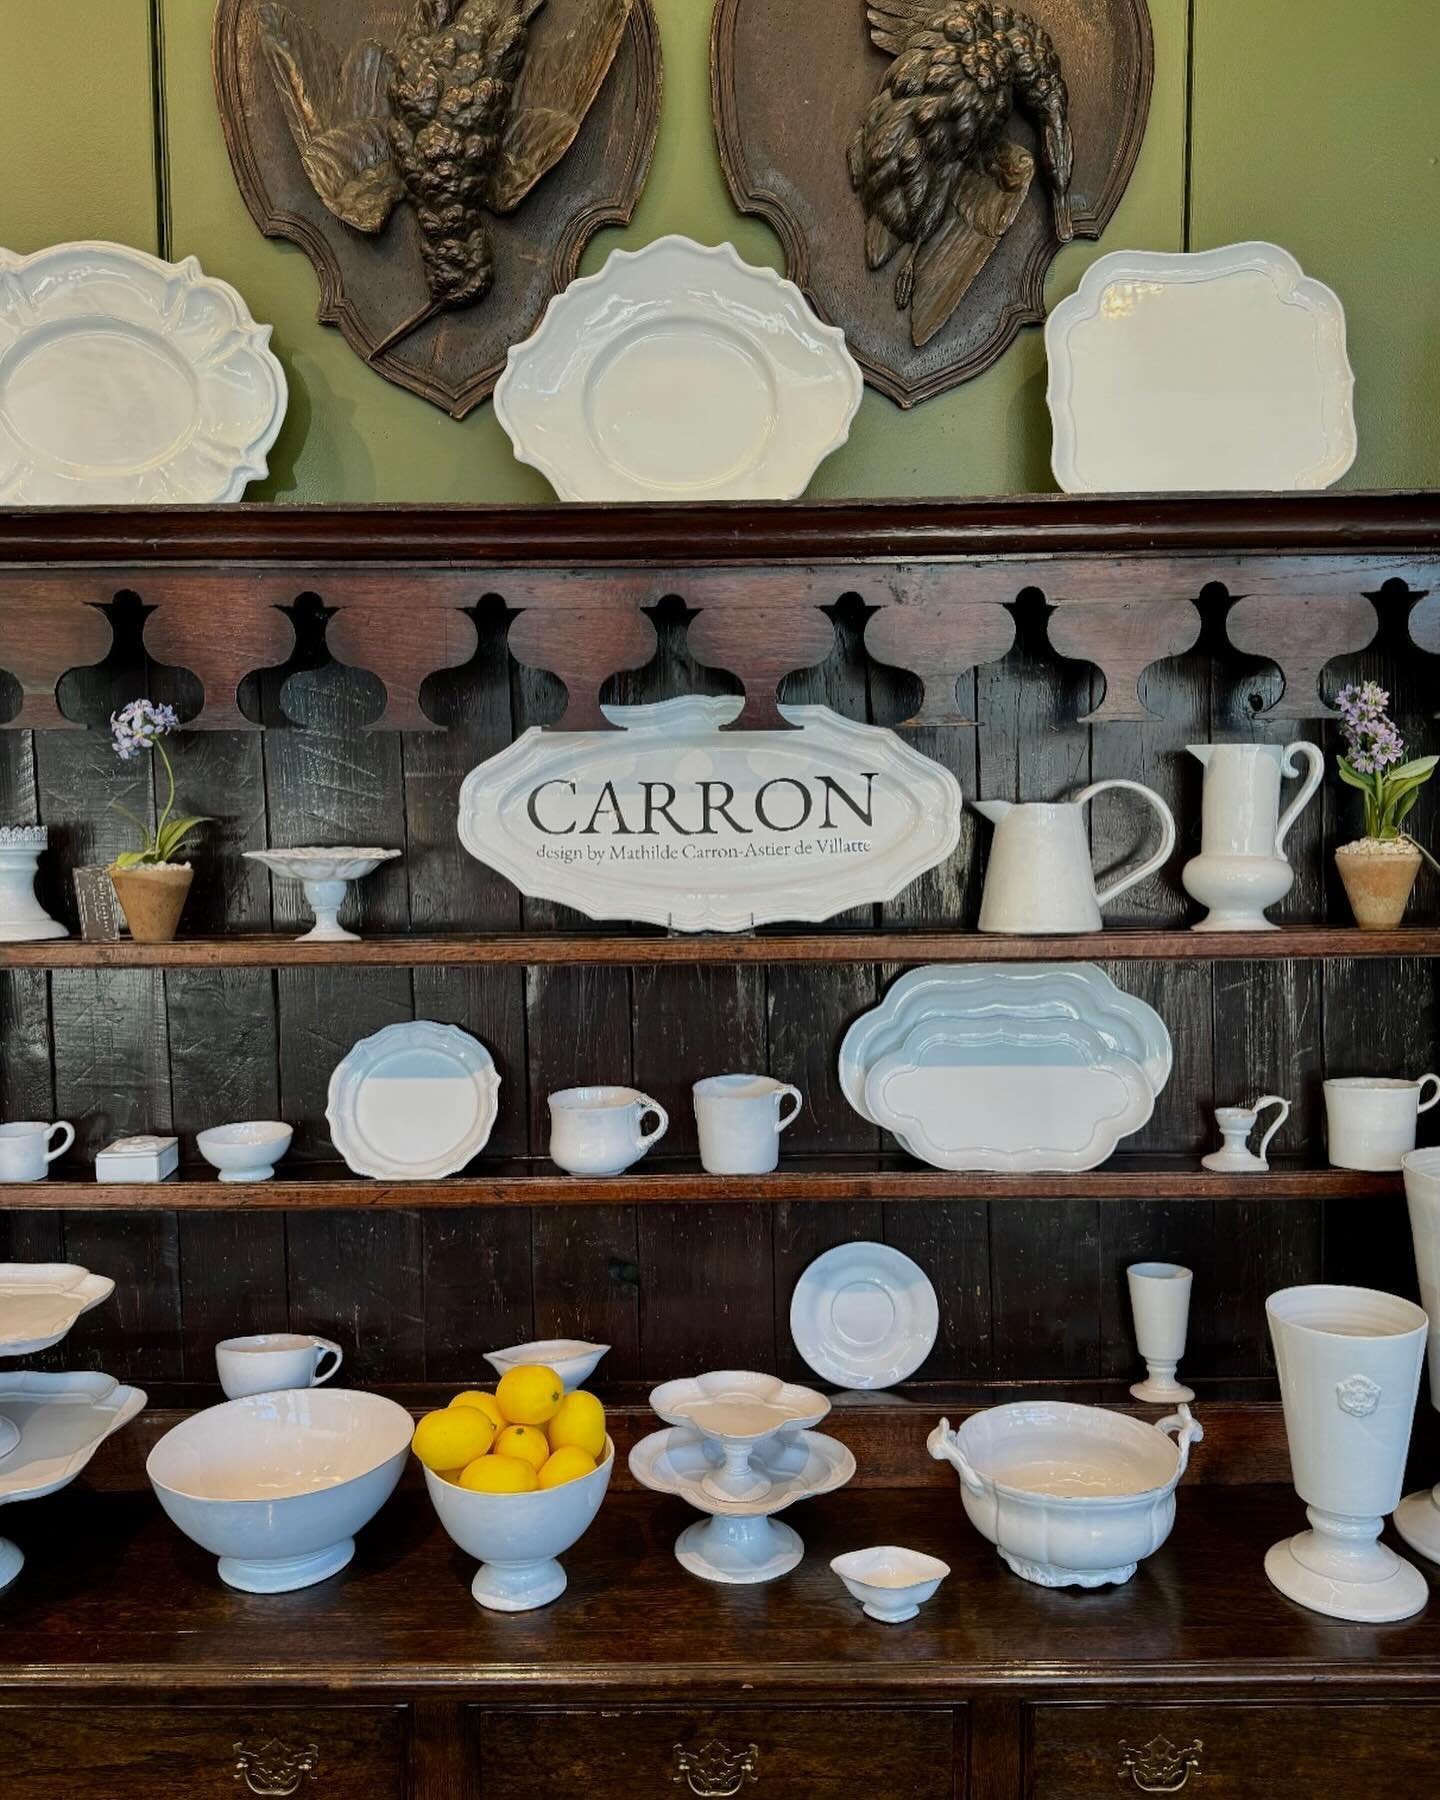 We think the @carron.paris works well against the beautiful antique hutch. Just in time for Mother&rsquo;s Day ! Stop by the San Francisco shop to put your favorite piece aside and we can take care of the rest. #itiswhatwedo #takecareofdetails #mothe